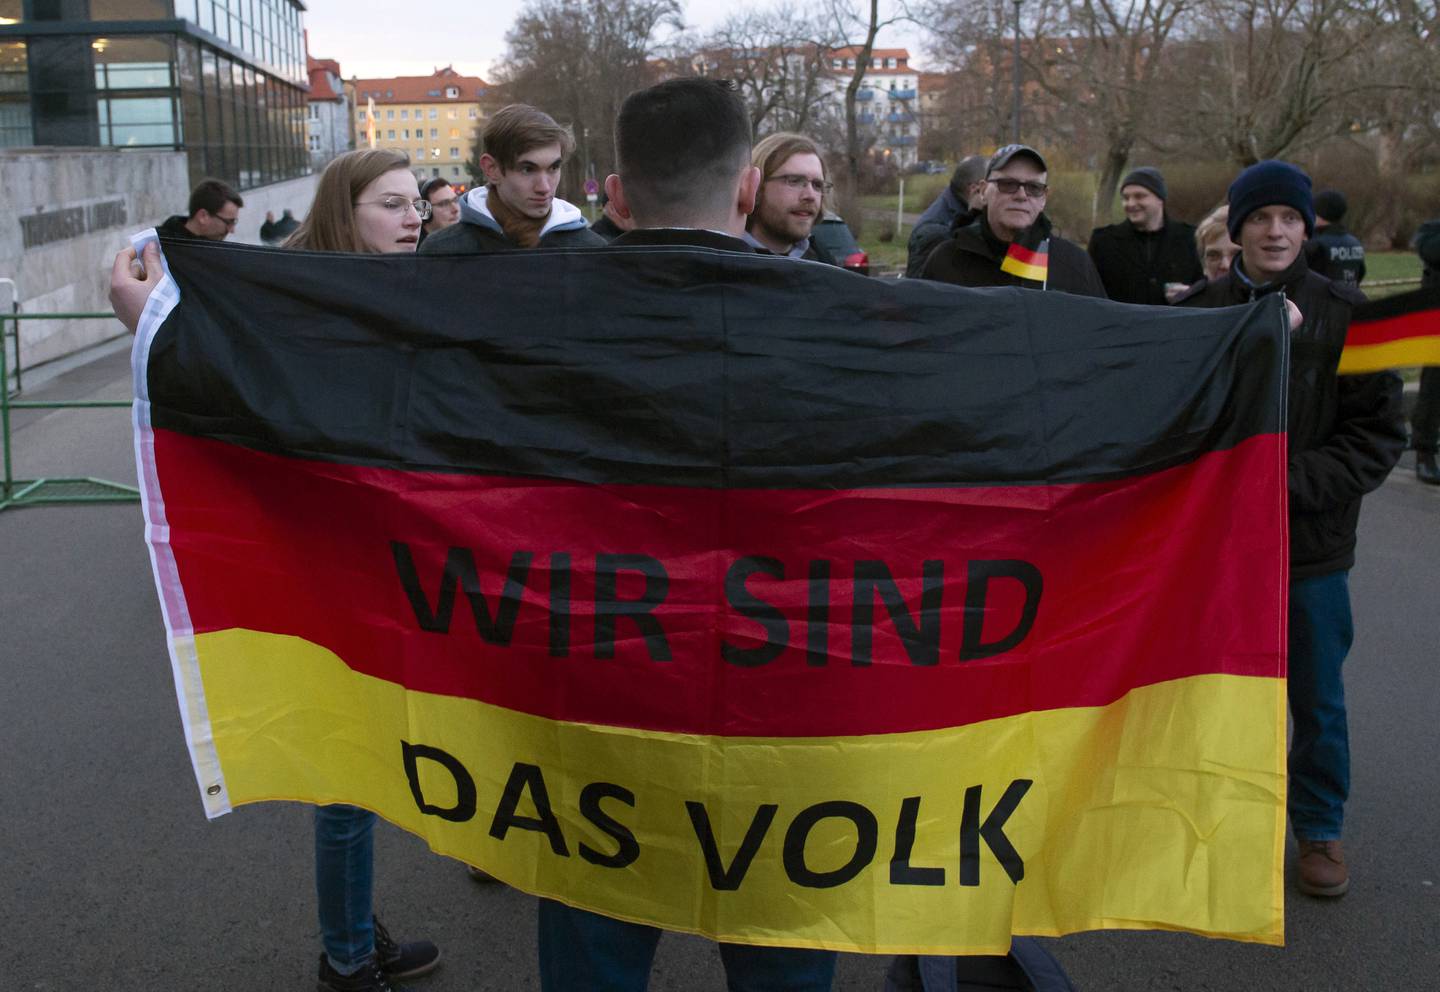 People attend a so called 'A light for democracy' silent demonstration, initiated by the far-right Alternative for Germany (AfD) party in Erfurt, central Germany, Tuesday, March 3, 2020. The words at the German flag read 'We are the people'. The parliament of the eastern German state Thuringia will elect a new governor on Wednesday, March 4, 2020. (AP Photo/Jens Meyer)